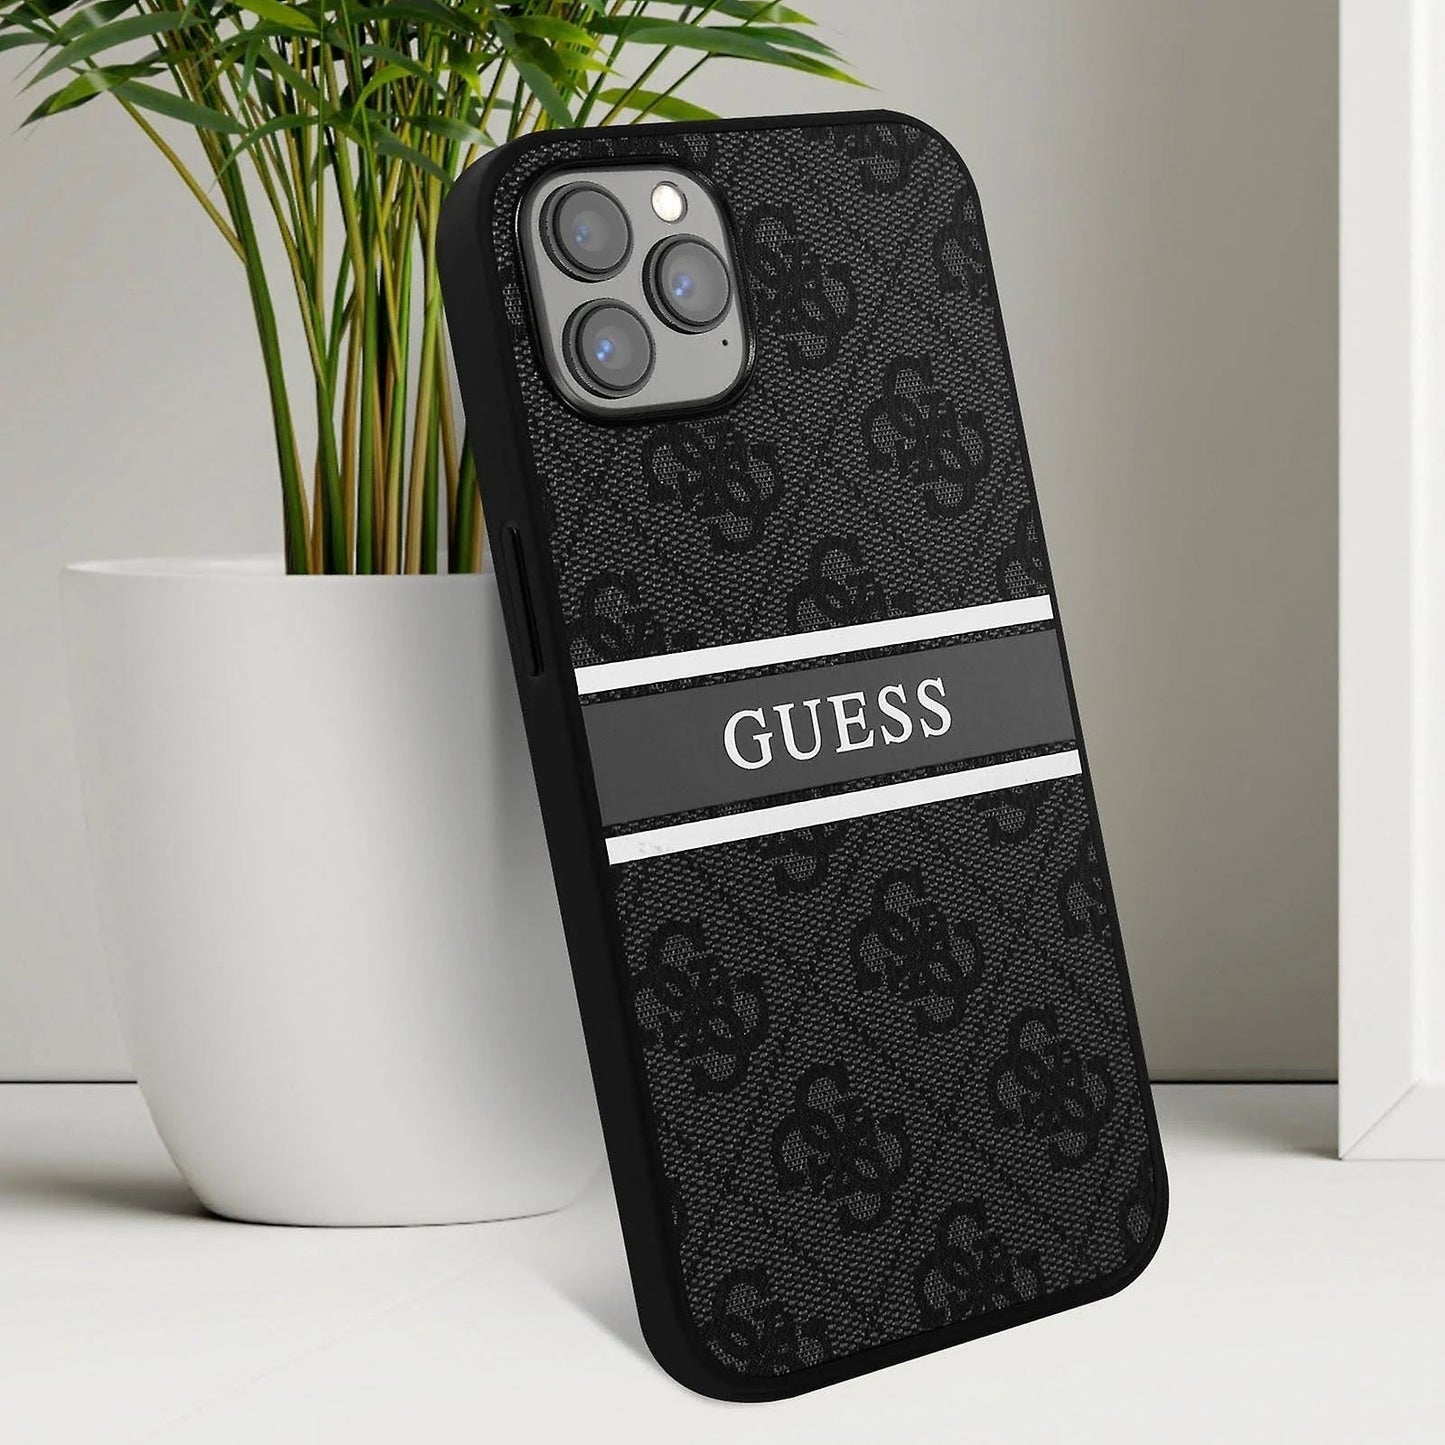 iPhone 13 LEATHER CASE GUESS PRINTED ALL OVER DESIGN - GUESS - GREY/BLACK